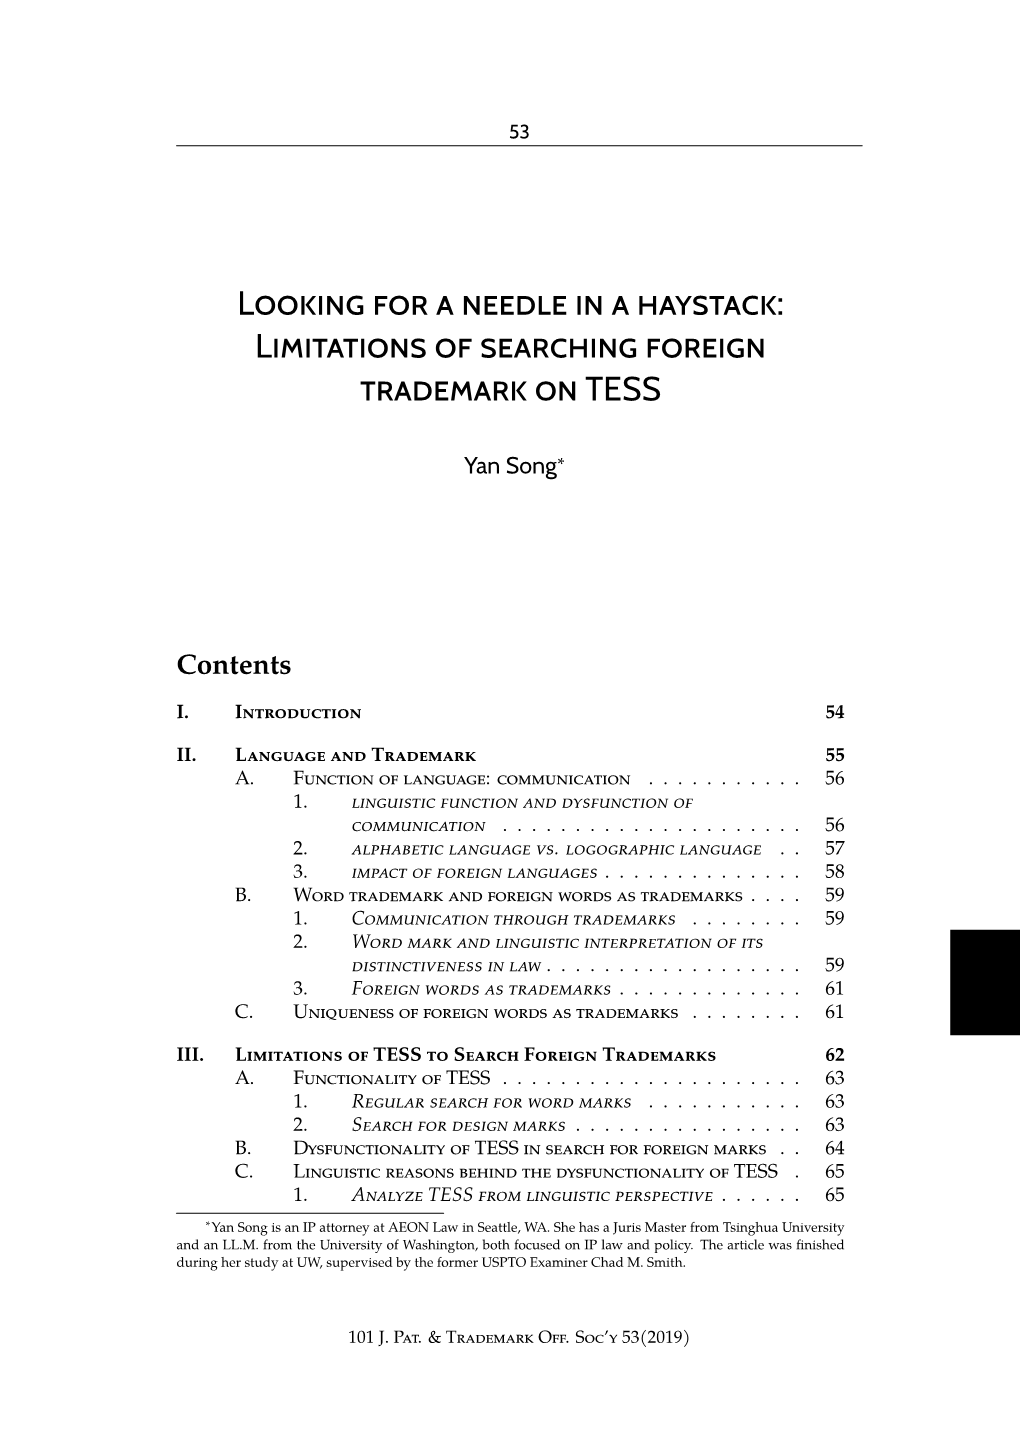 Looking for a Needle in a Haystack: Limitations of Searching Foreign Trademark on Tess